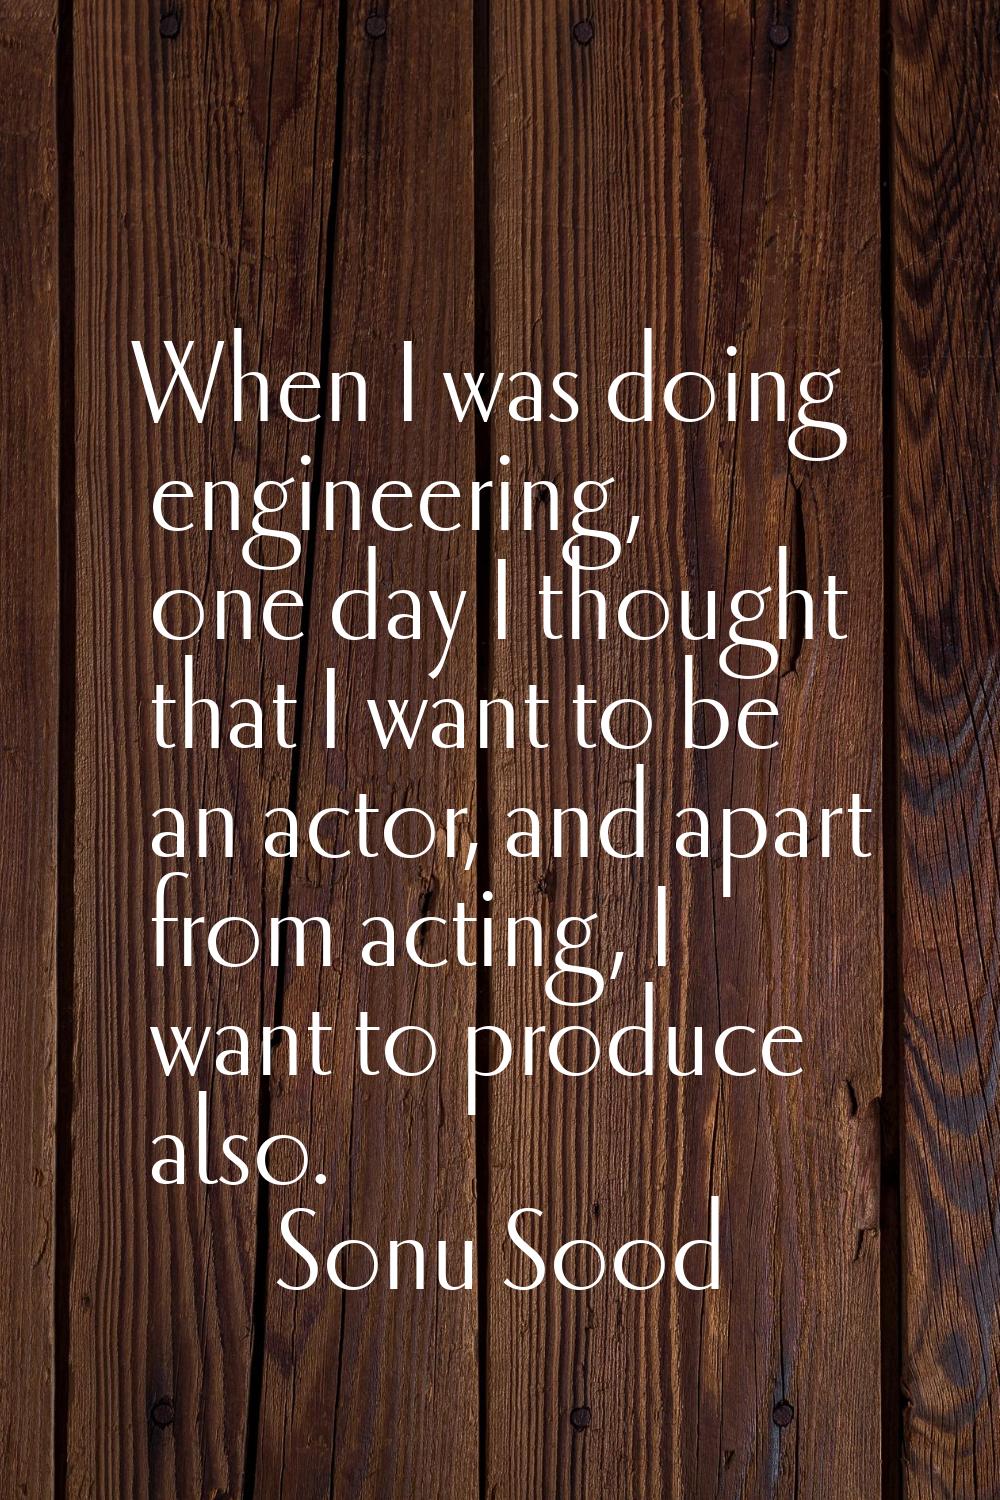 When I was doing engineering, one day I thought that I want to be an actor, and apart from acting, 